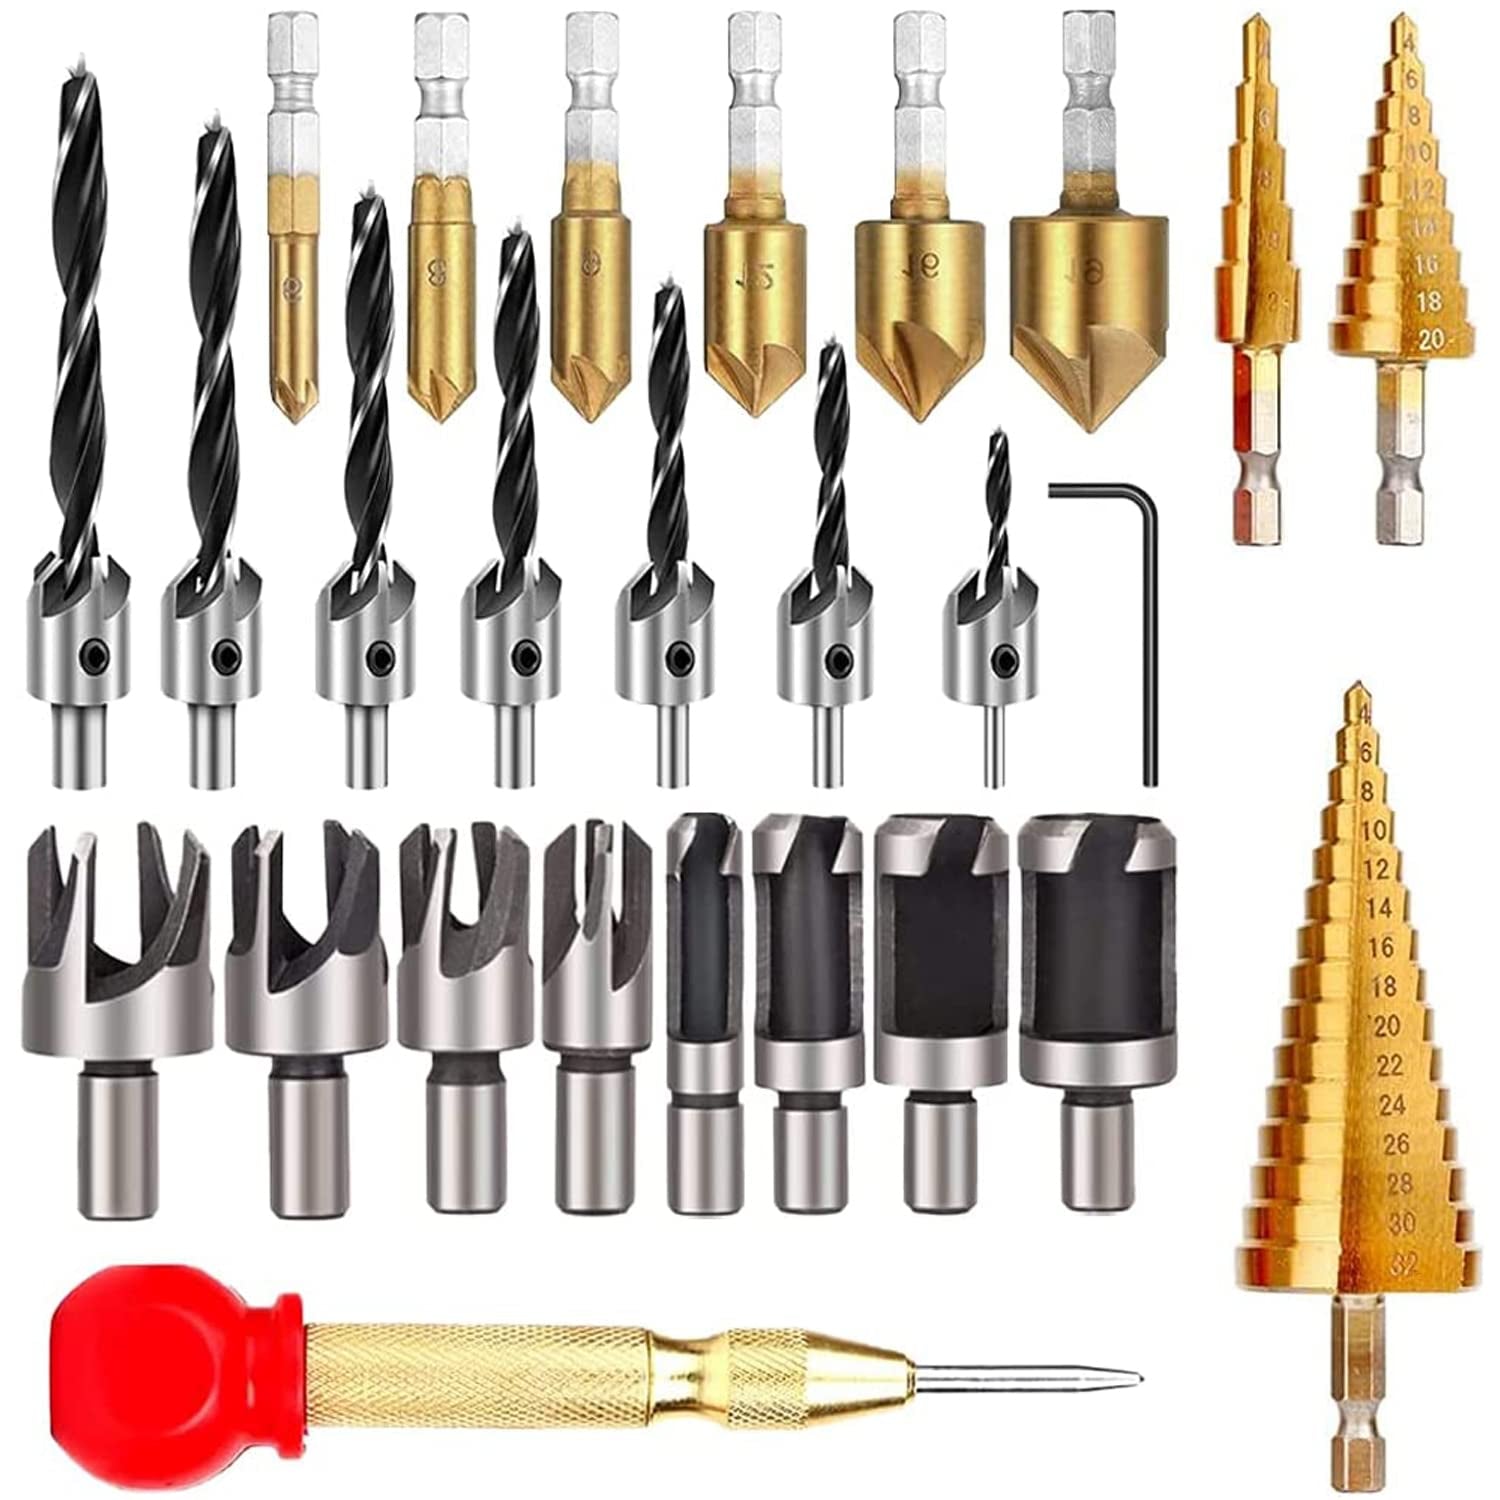 LAMPTOP, LAMPTOP 26-Pack Woodworking Chamfer Drilling Tools Including 6 Countersink Drill Bits, 7 Three Pointed Countersink Drill Bit with L-Wrench, 8 Wood Plug Cutter, 3 Step Drill Bit, and Automatic